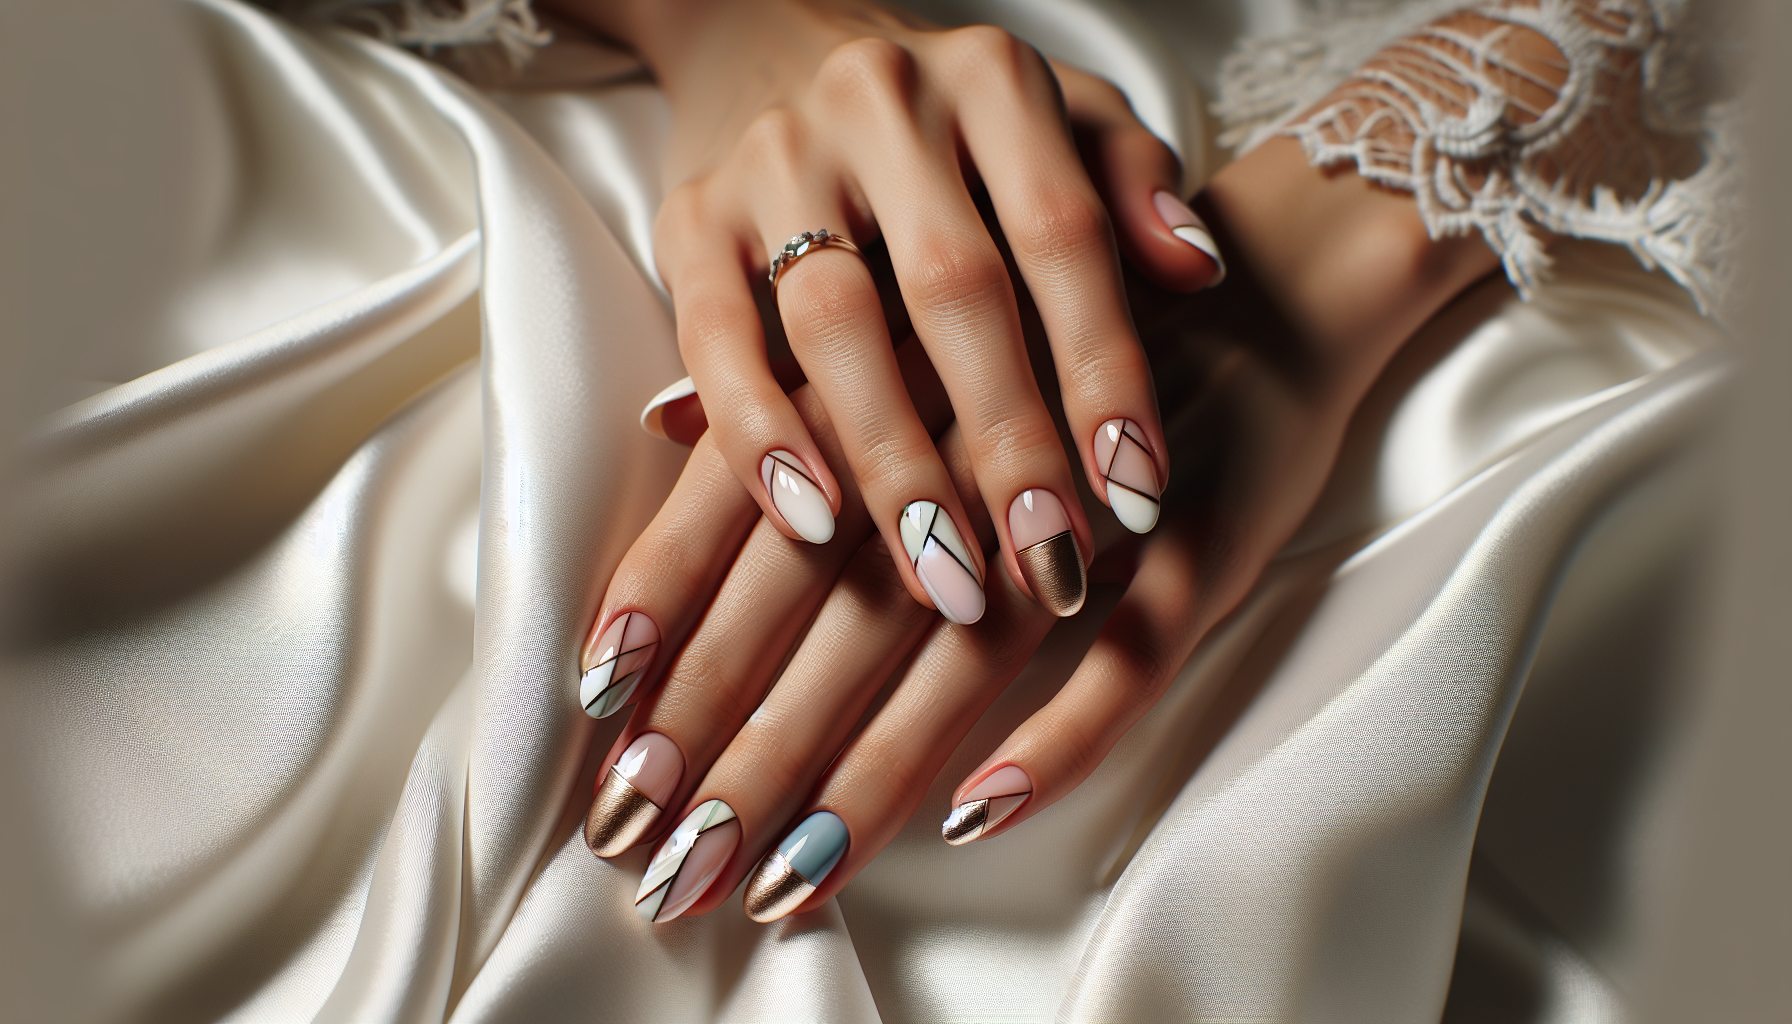 Modern French manicure with creative twist